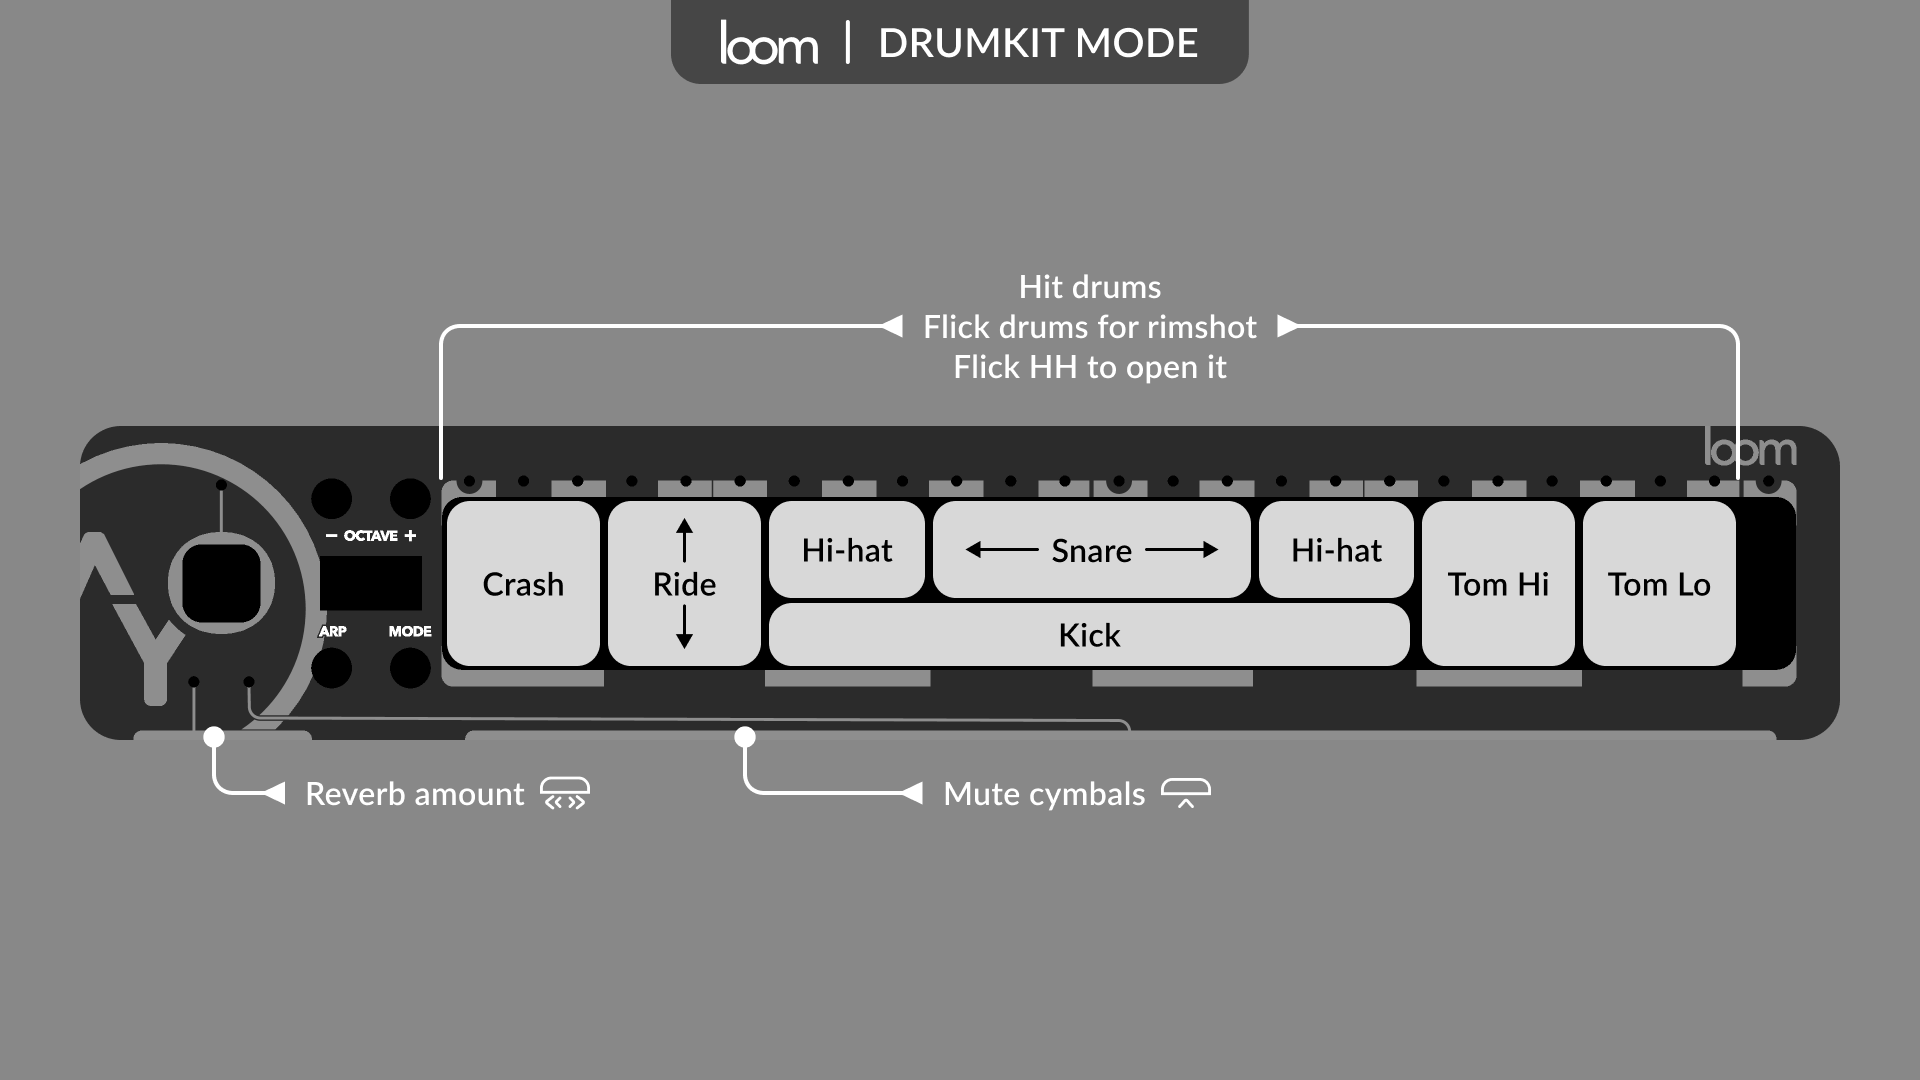 Drumkit mode: drum items are laid out on the surface to enable finger drumming, mute cymbals with the bar, change reverb amount with the slider.